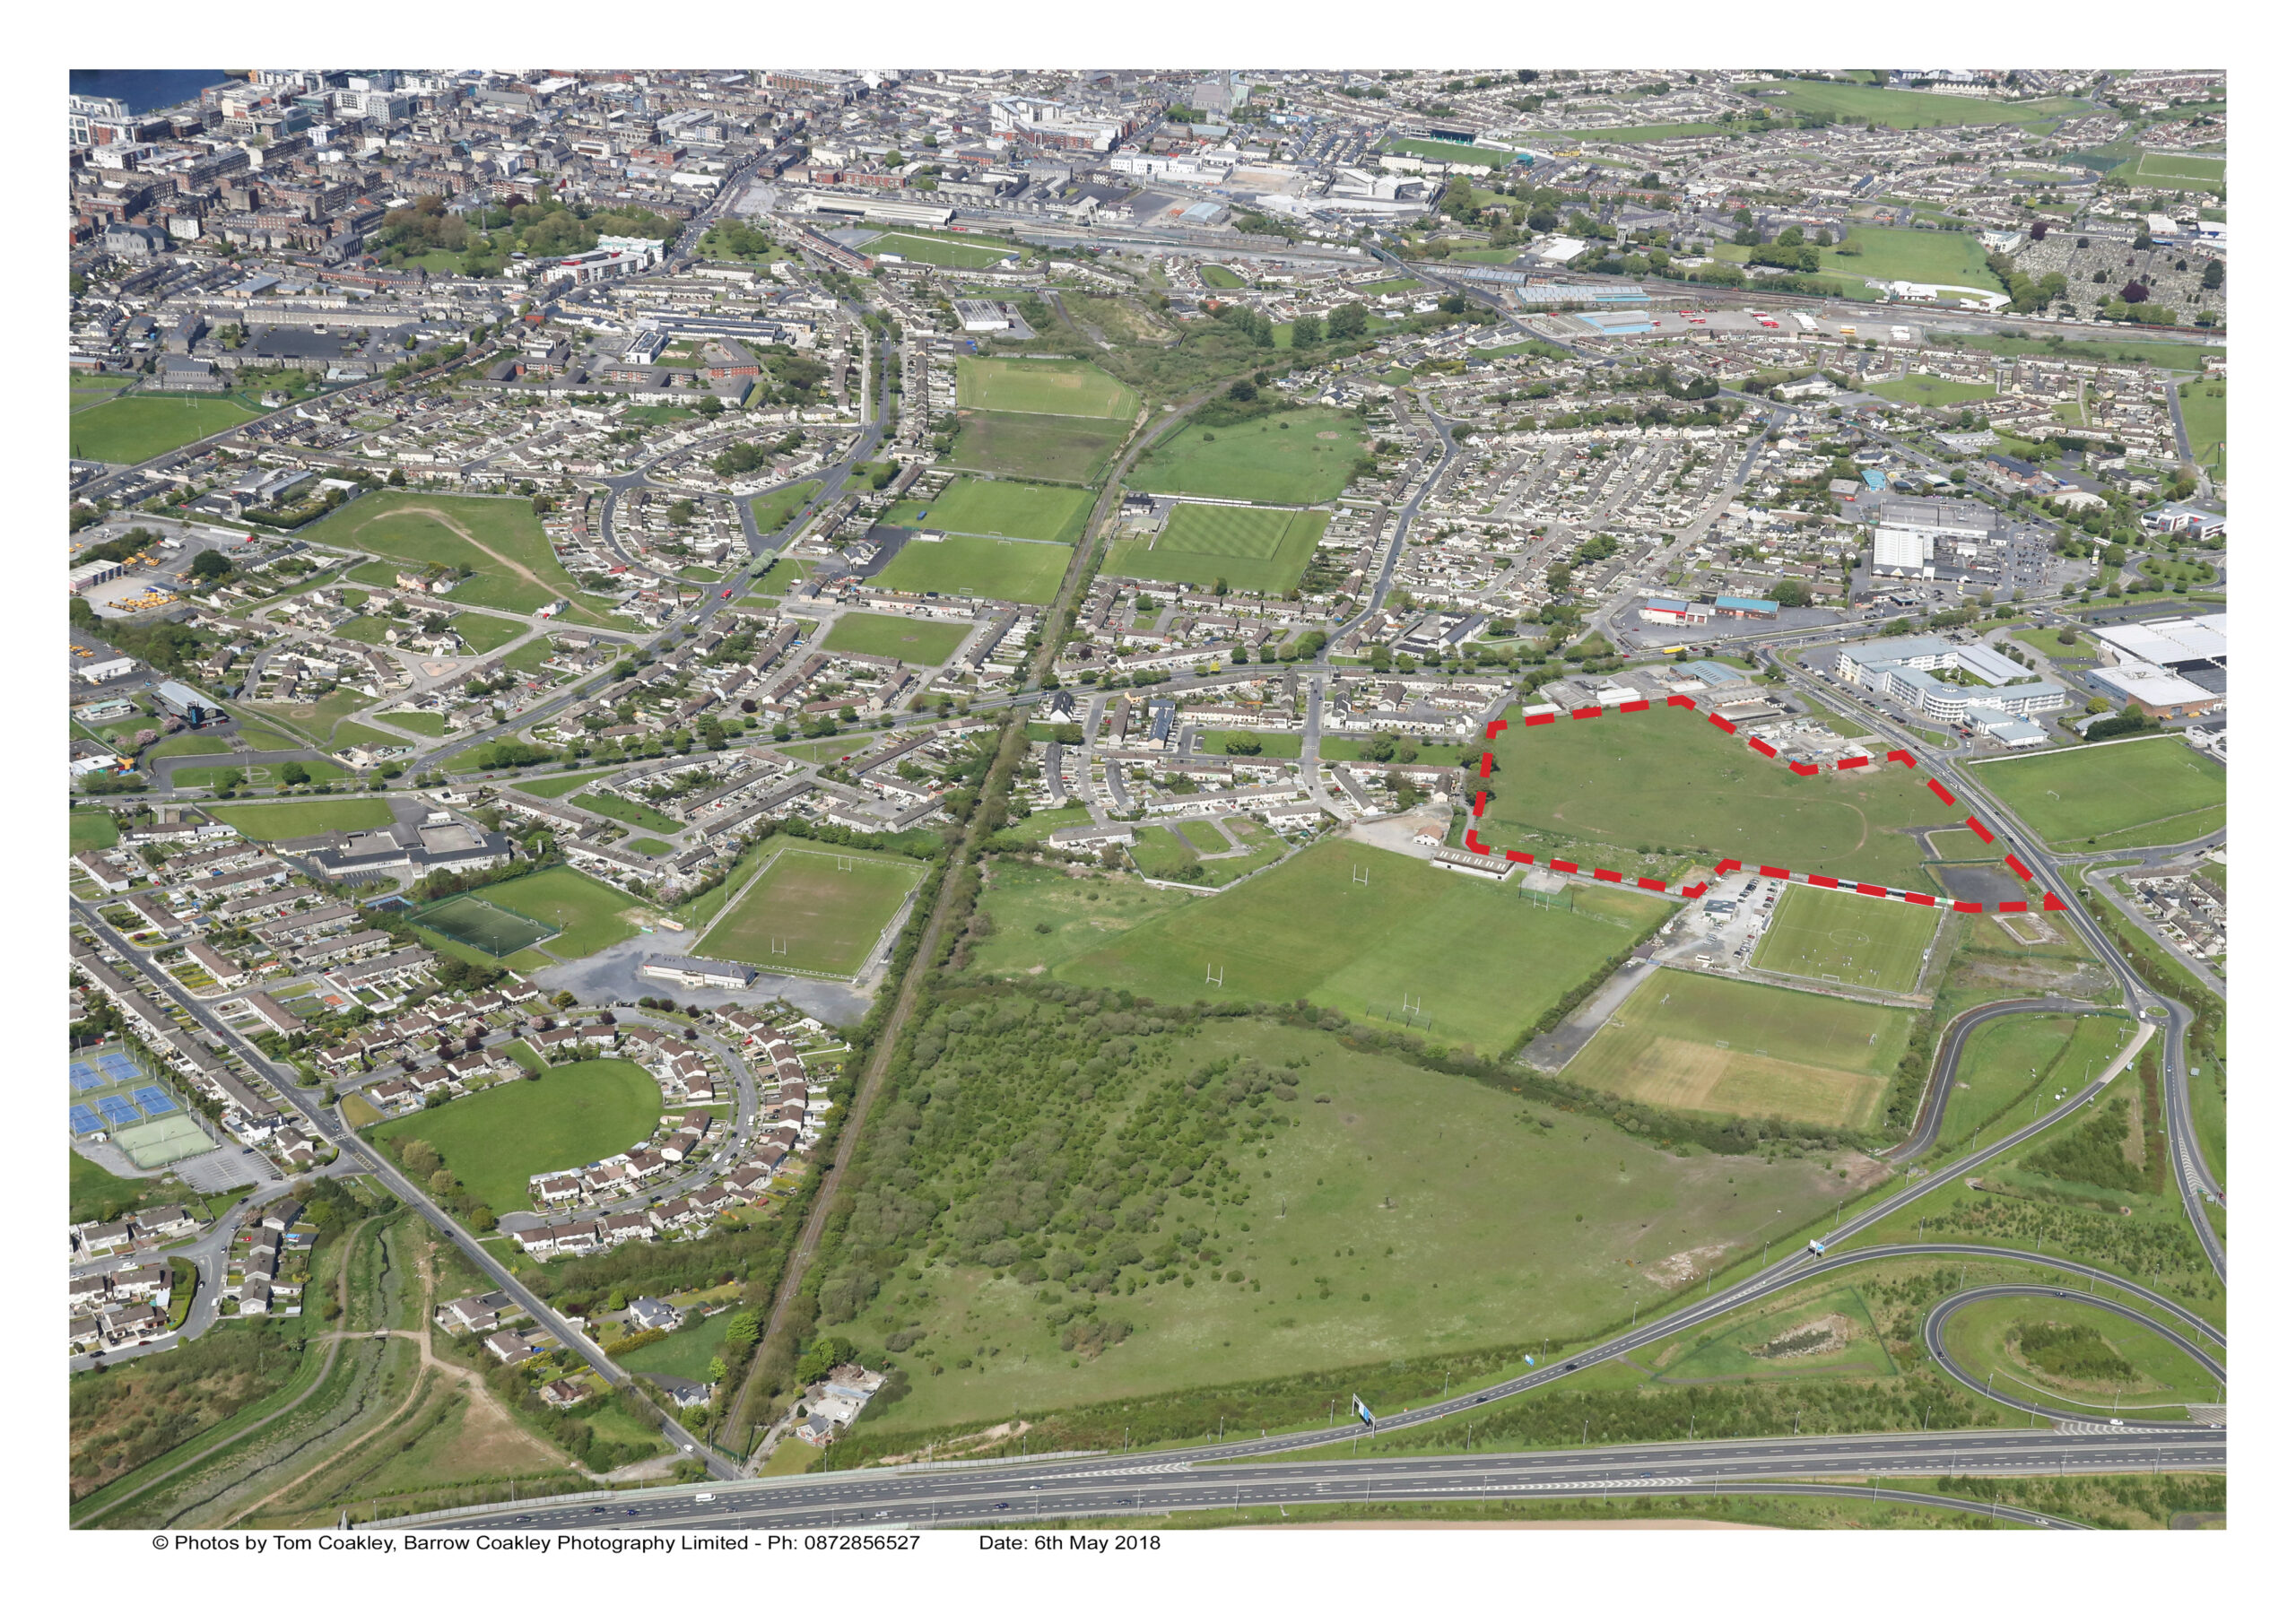 Toppins Field Masterplan taking shape with approval of 67 new homes under Social Housing PPP Programme